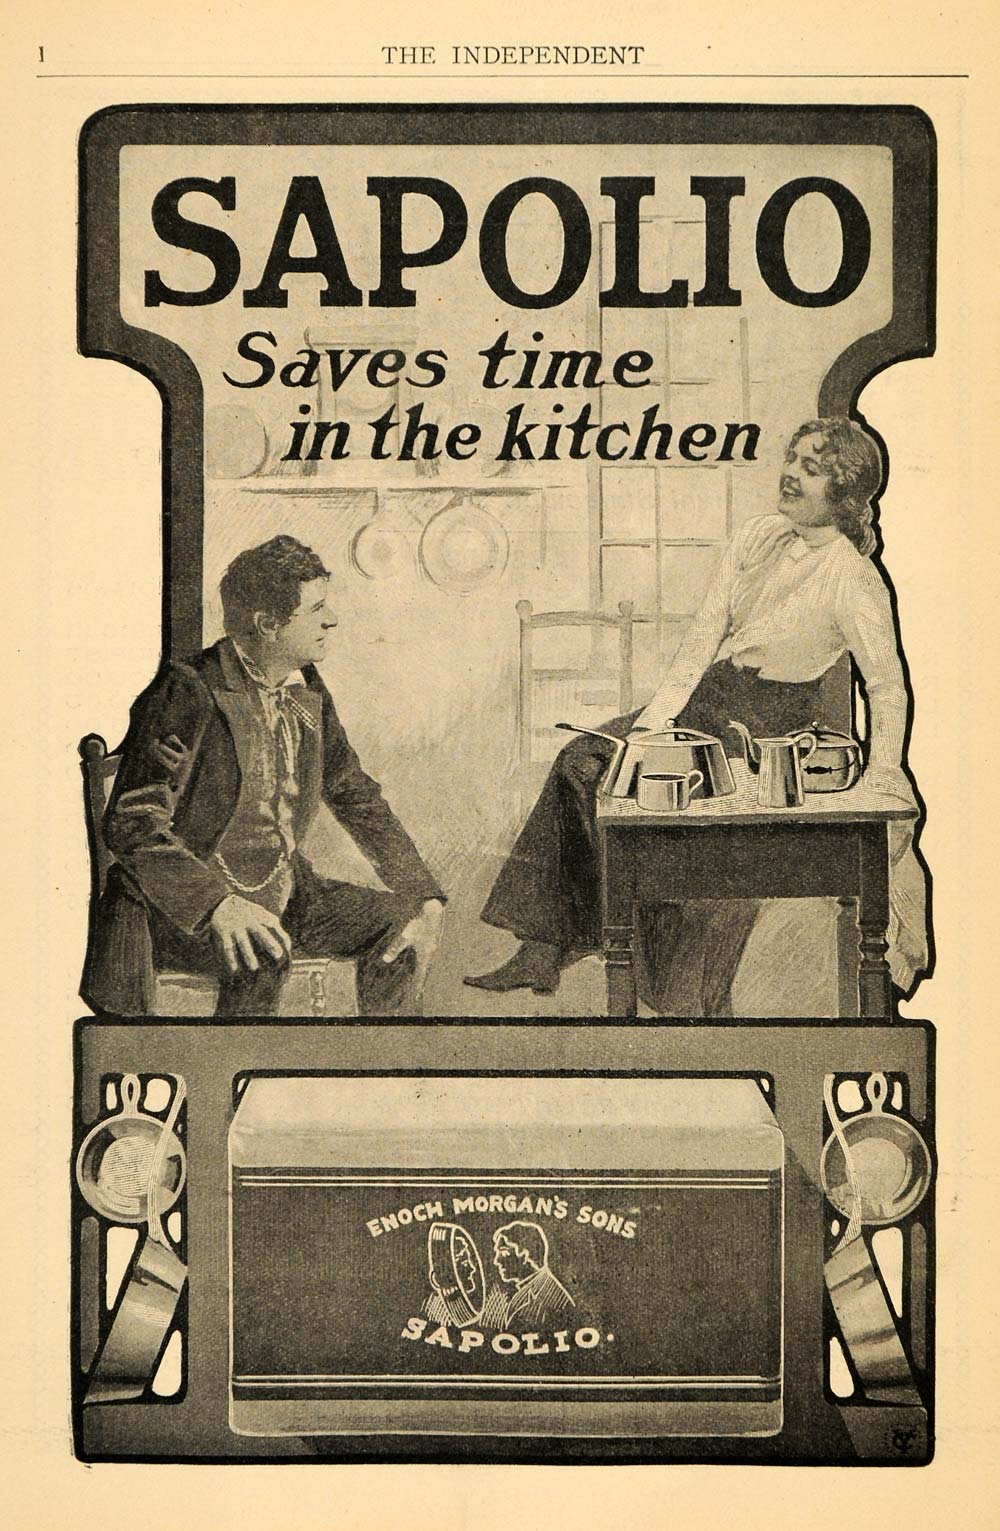 1903 Ad E Morgans Sons Sapolio Soap Cleaning Product - ORIGINAL ADVERTISING TIN5